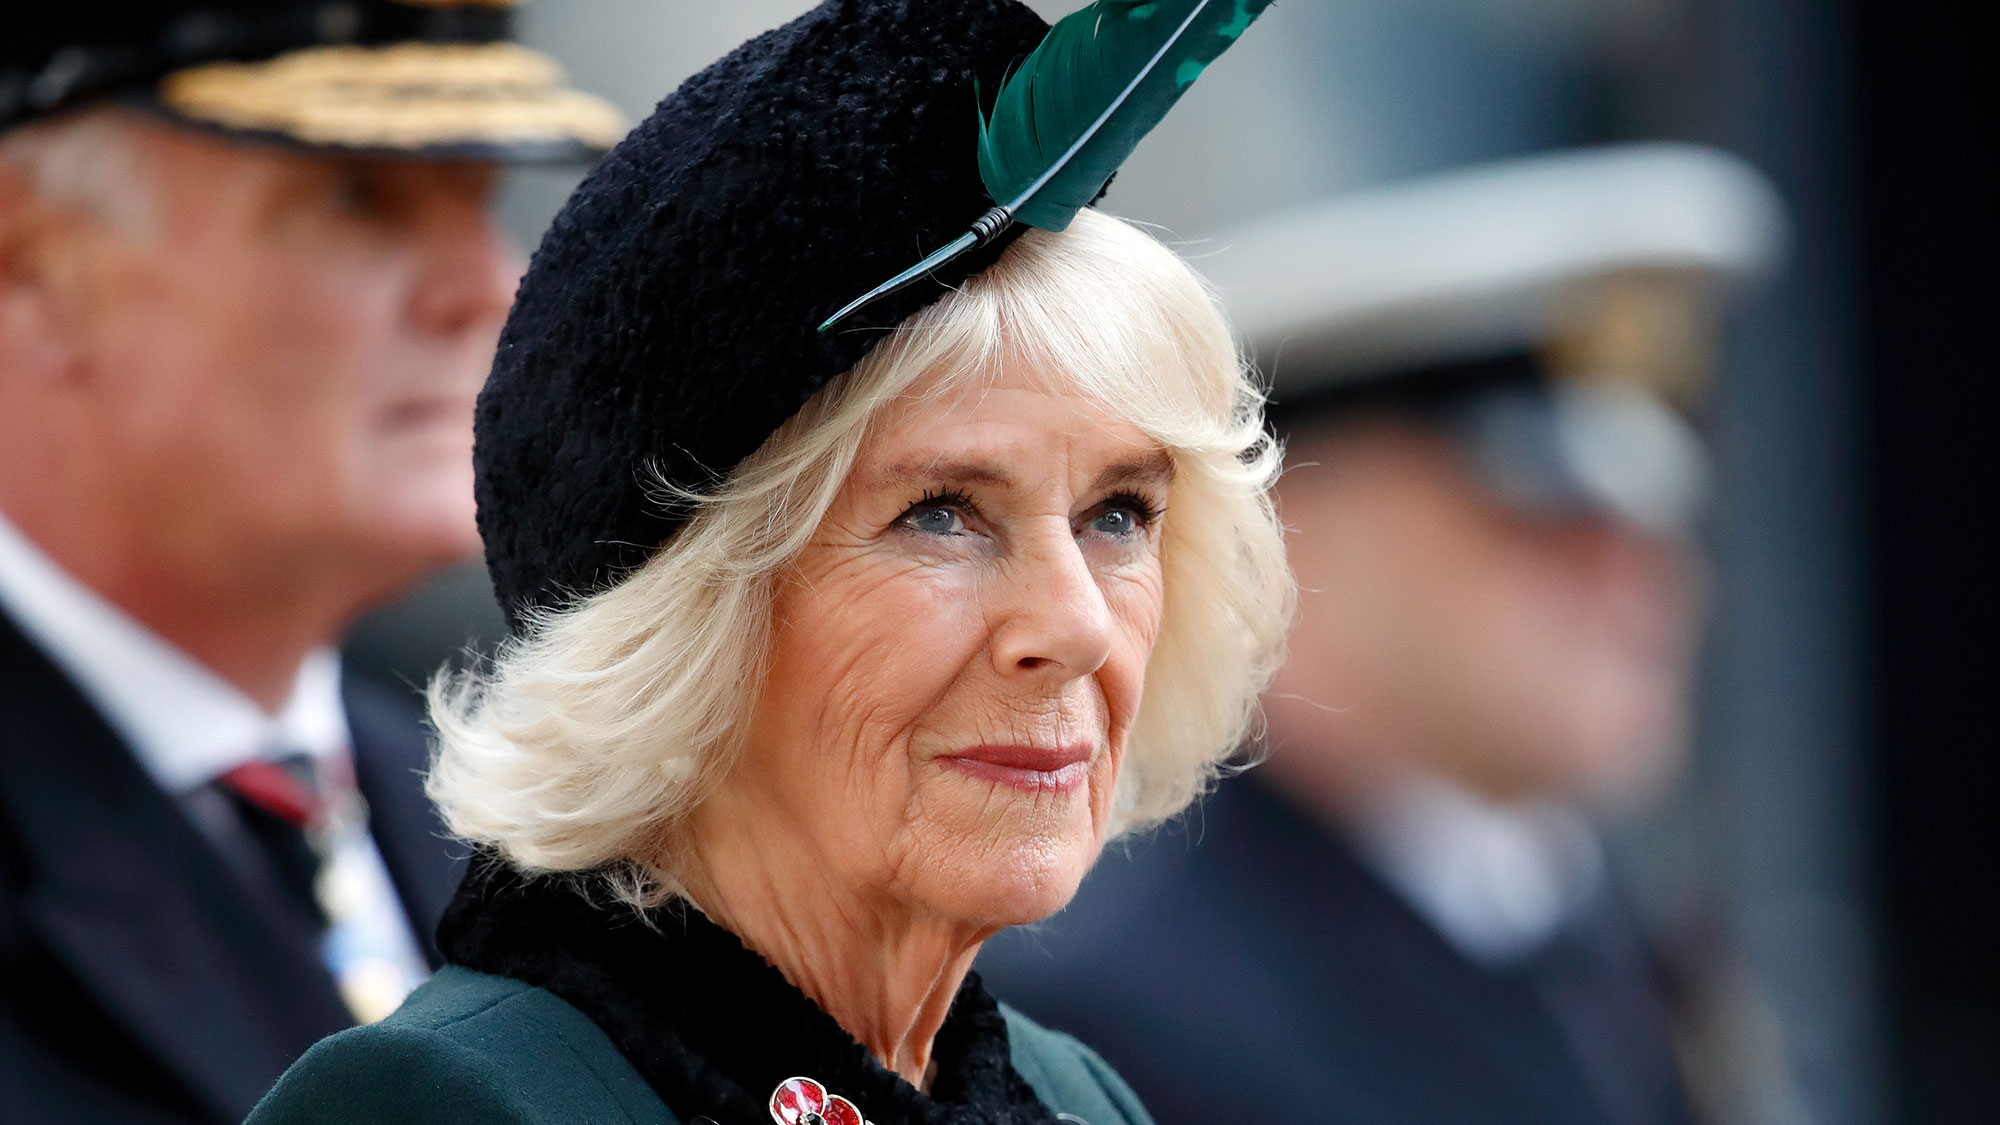 Camilla’s latest outfit honours her late father